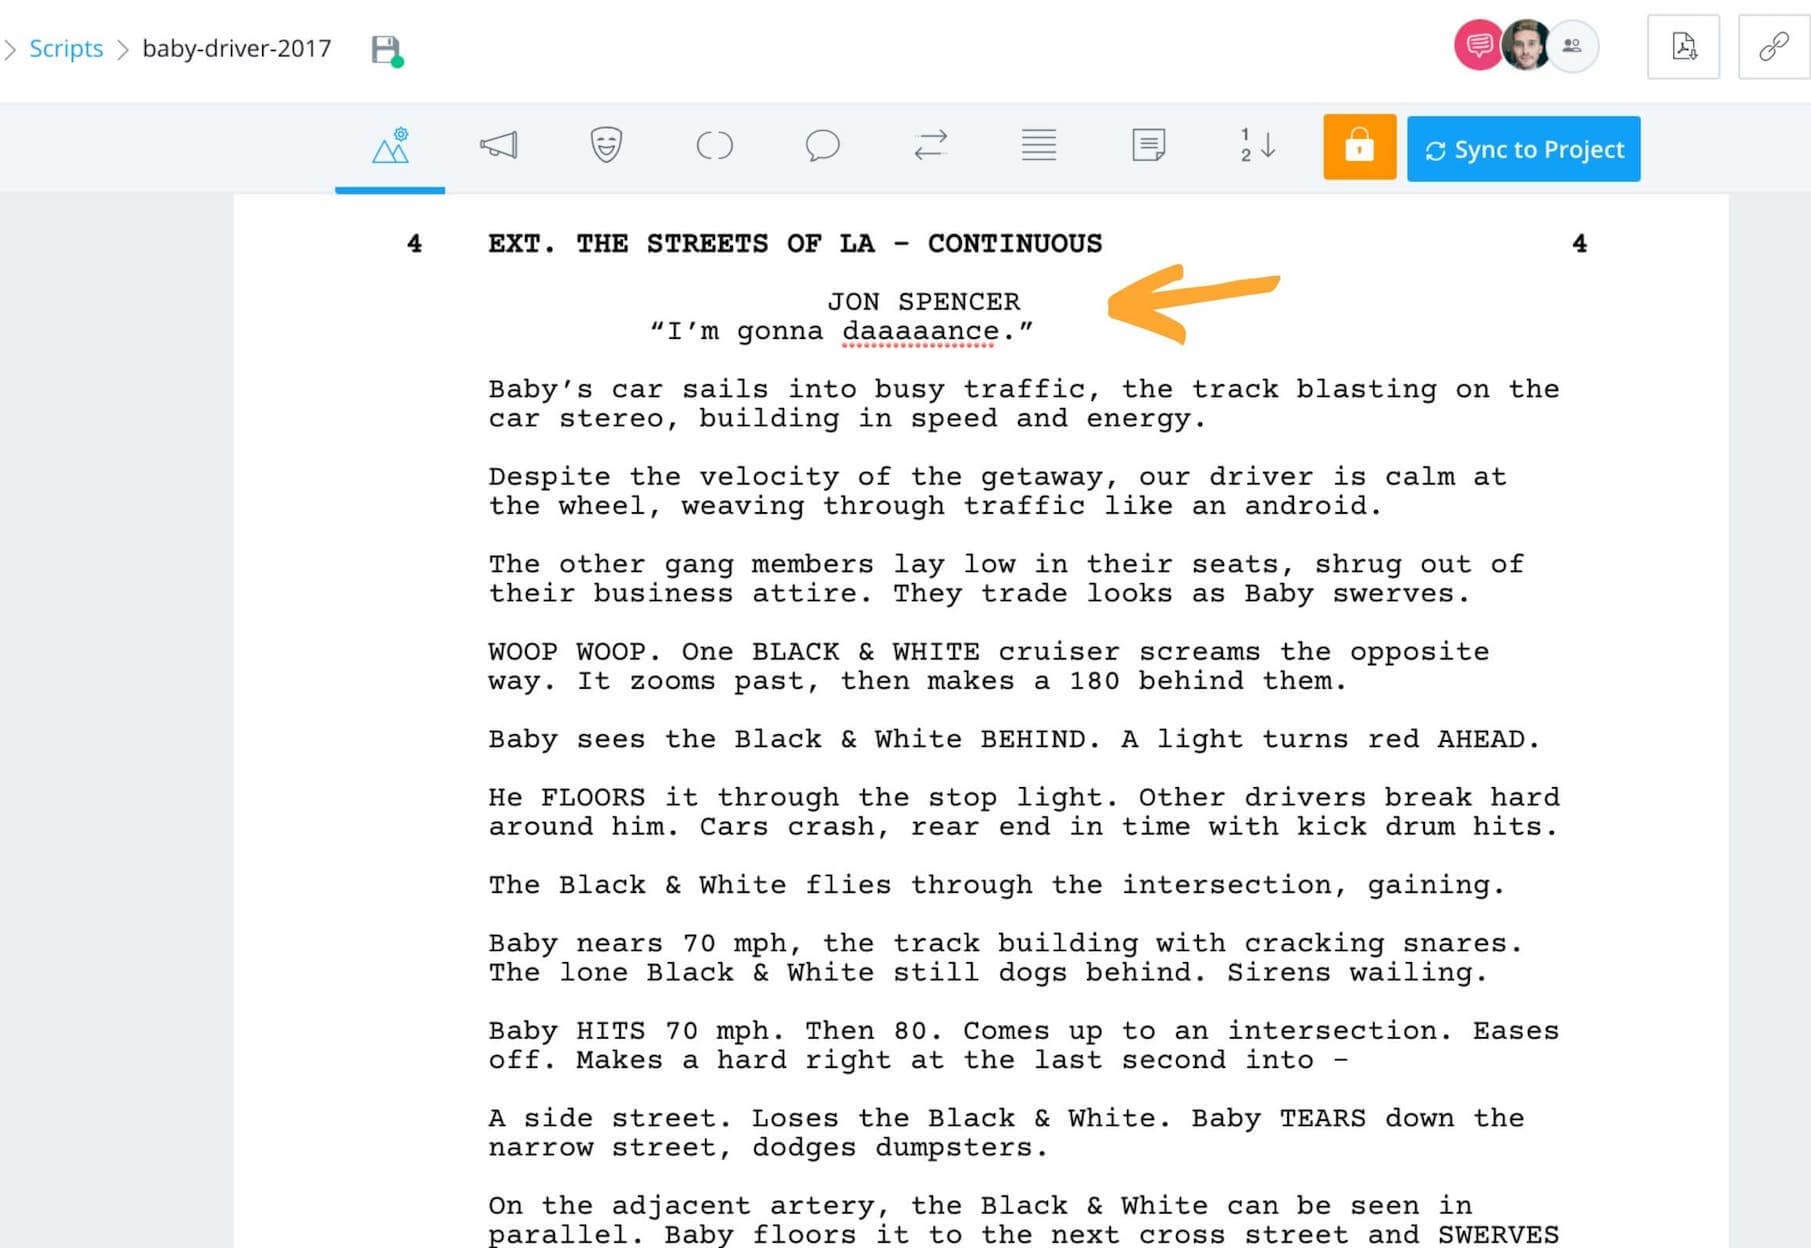 How to Write a Car Chase Scene - Baby Driver Chase Scene - StudioBinder Screenwriting Software